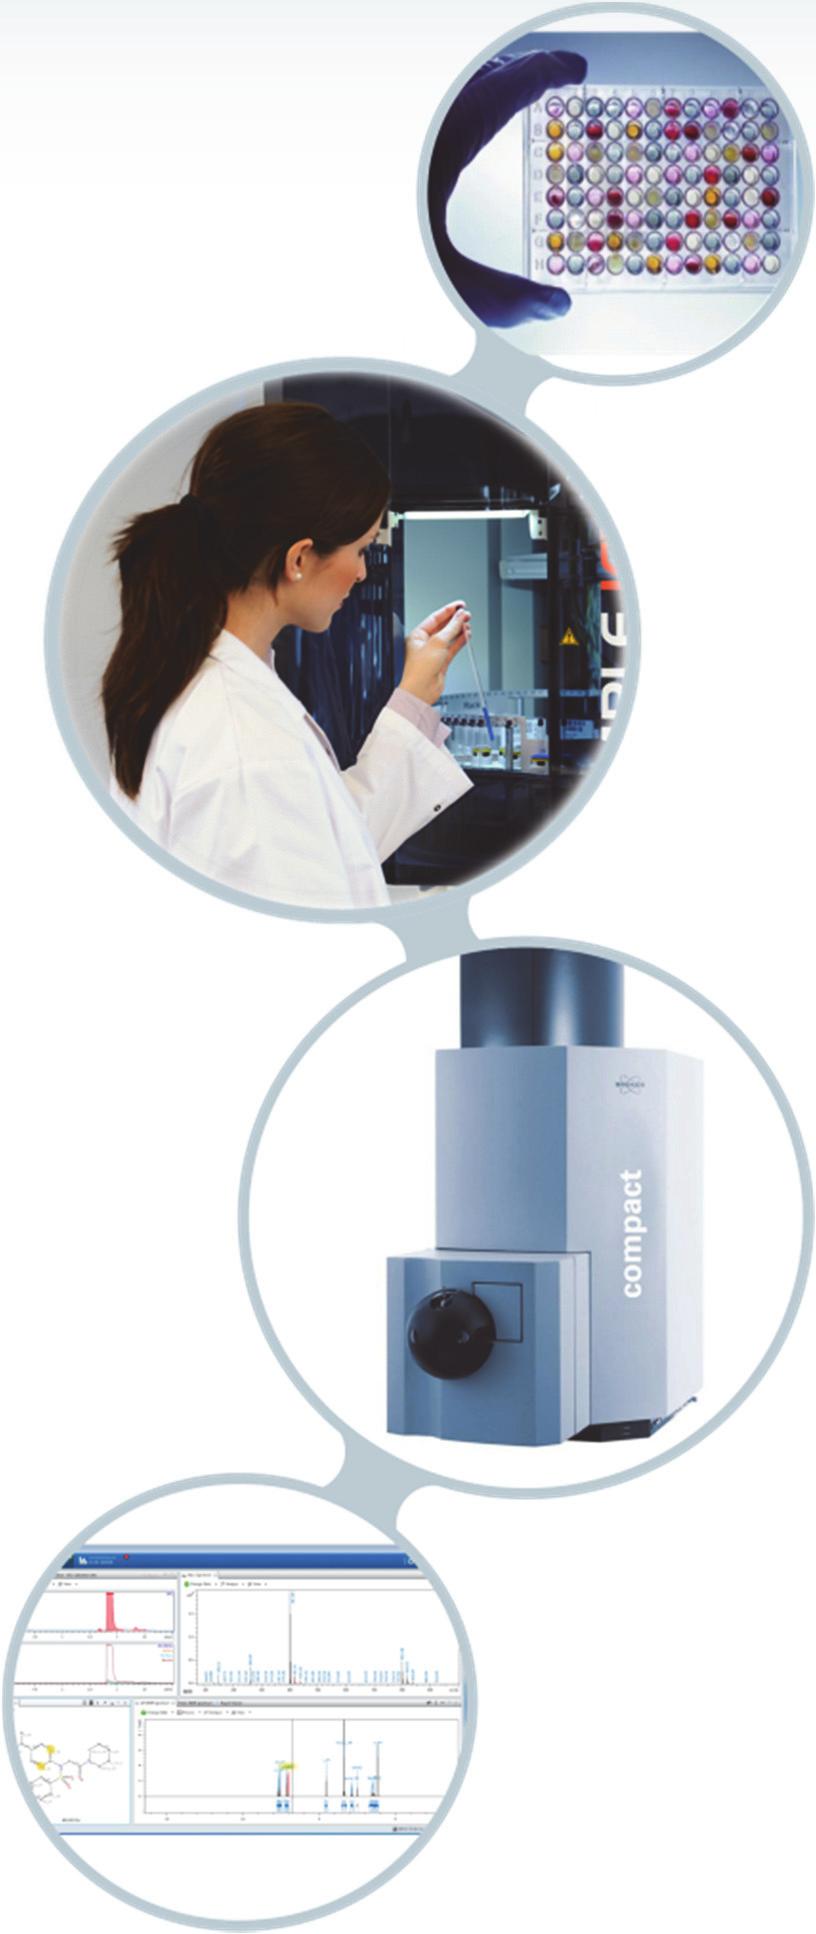 Bruker Fusion-SV: Unique Solution for SV full integration of complementary HRAM-MS and NMR data for significantly increased specificity, robustness and throughput of SV easily useable also for